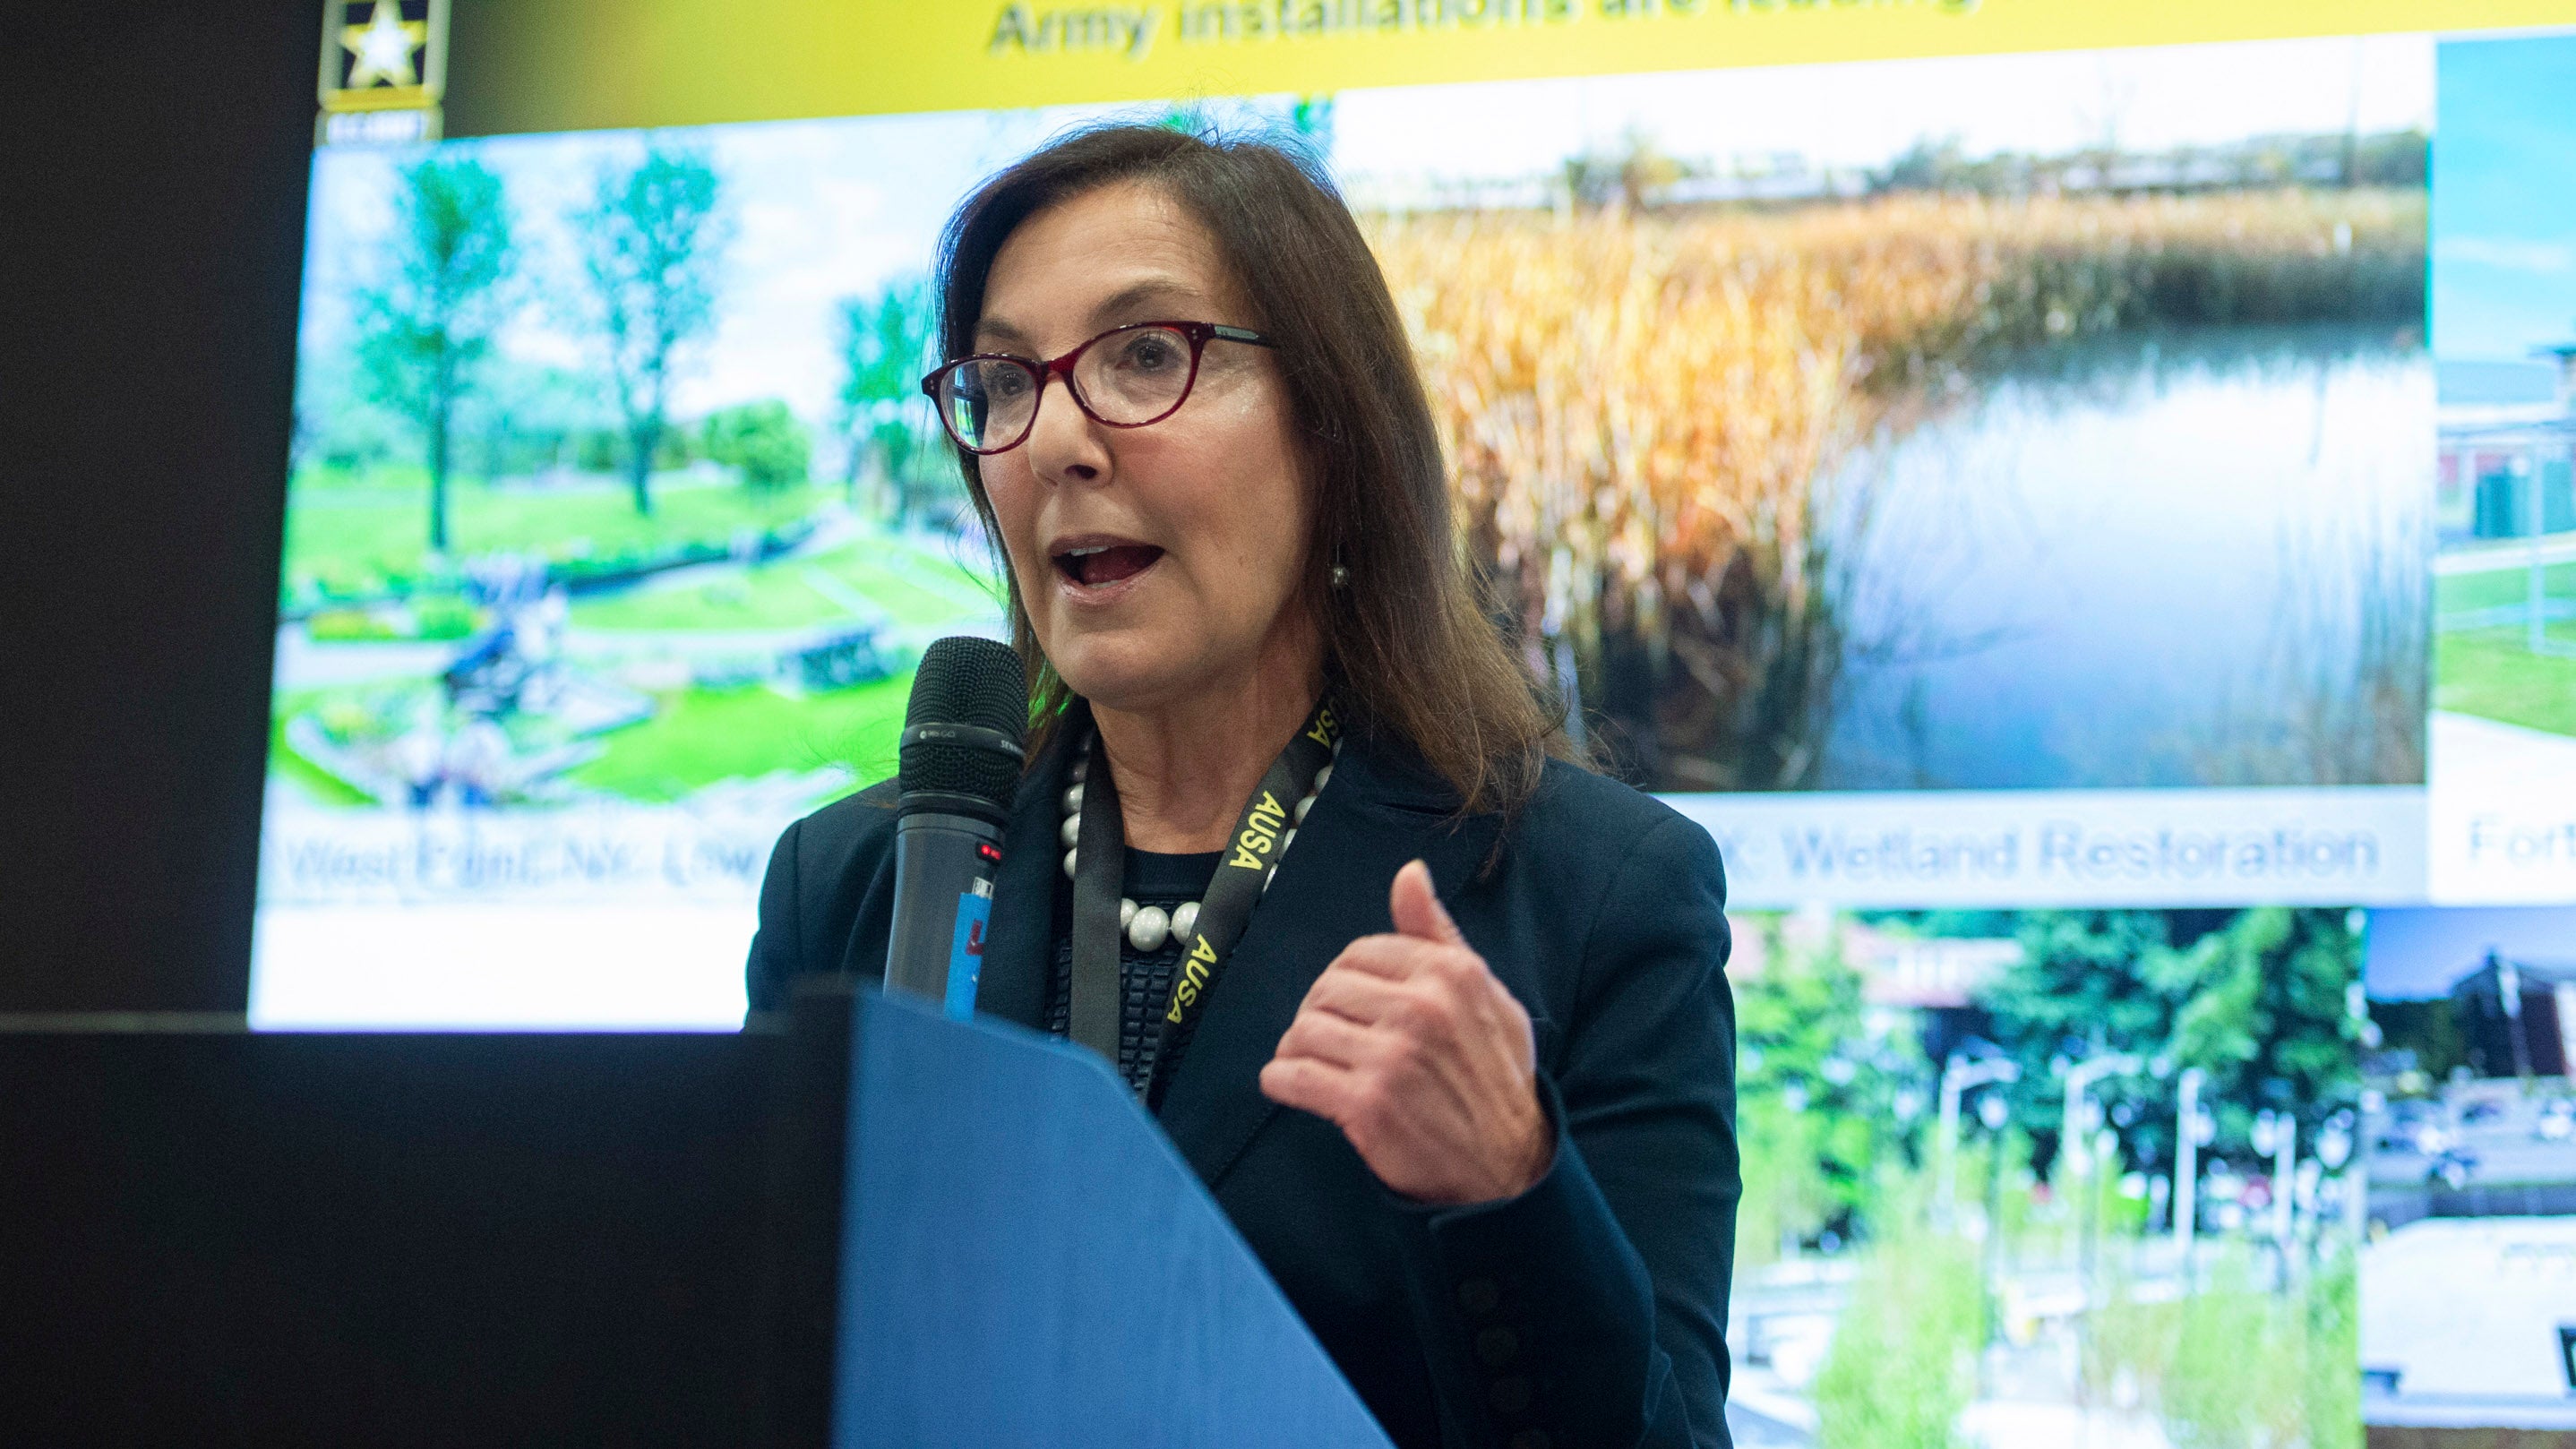 Rachel Jacobson, Assistant Secretary of the Army for Installations, Energy and Environment, speaks about water resilience at the Warriors Corner  during the AUSA 2022 Annual Meeting in Washington, D.C., Tuesday, Oct. 11, 2022. (Rod Lamkey for AUSA)